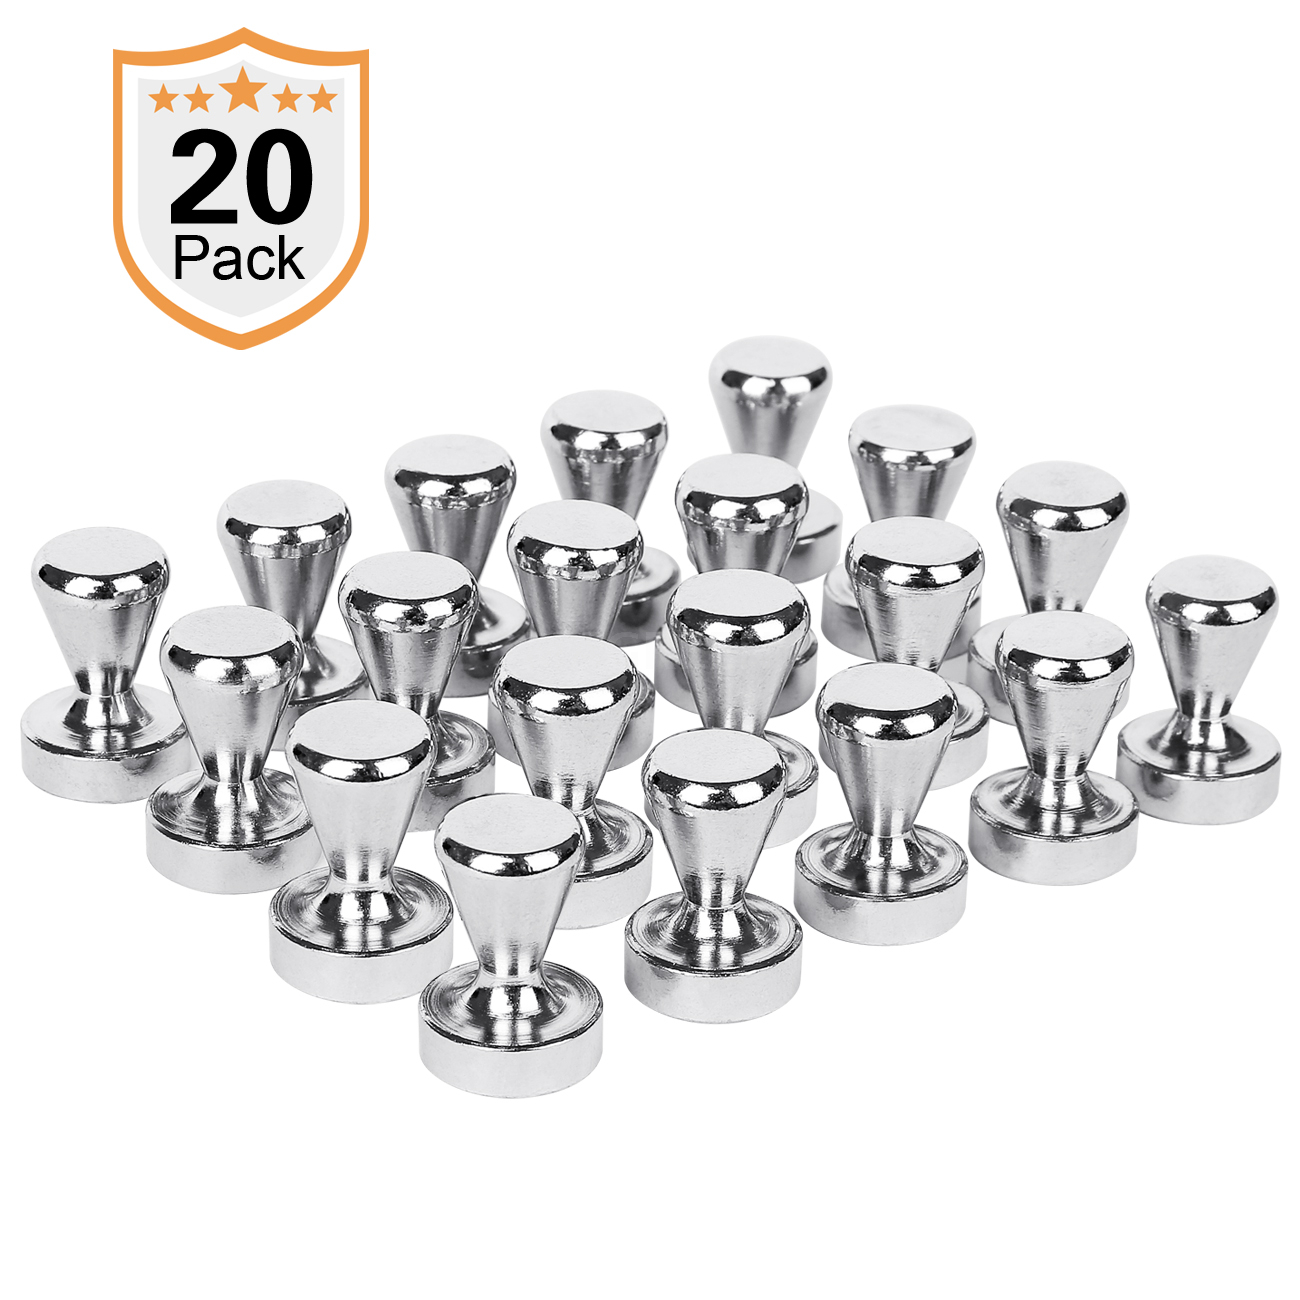 Magnetic Push Pins 20 Pack ,Silver Magnets, Brushed Nickel Push Pin Strong Magnets for Refrigerator,Whiteboard, Map, Calendar And More